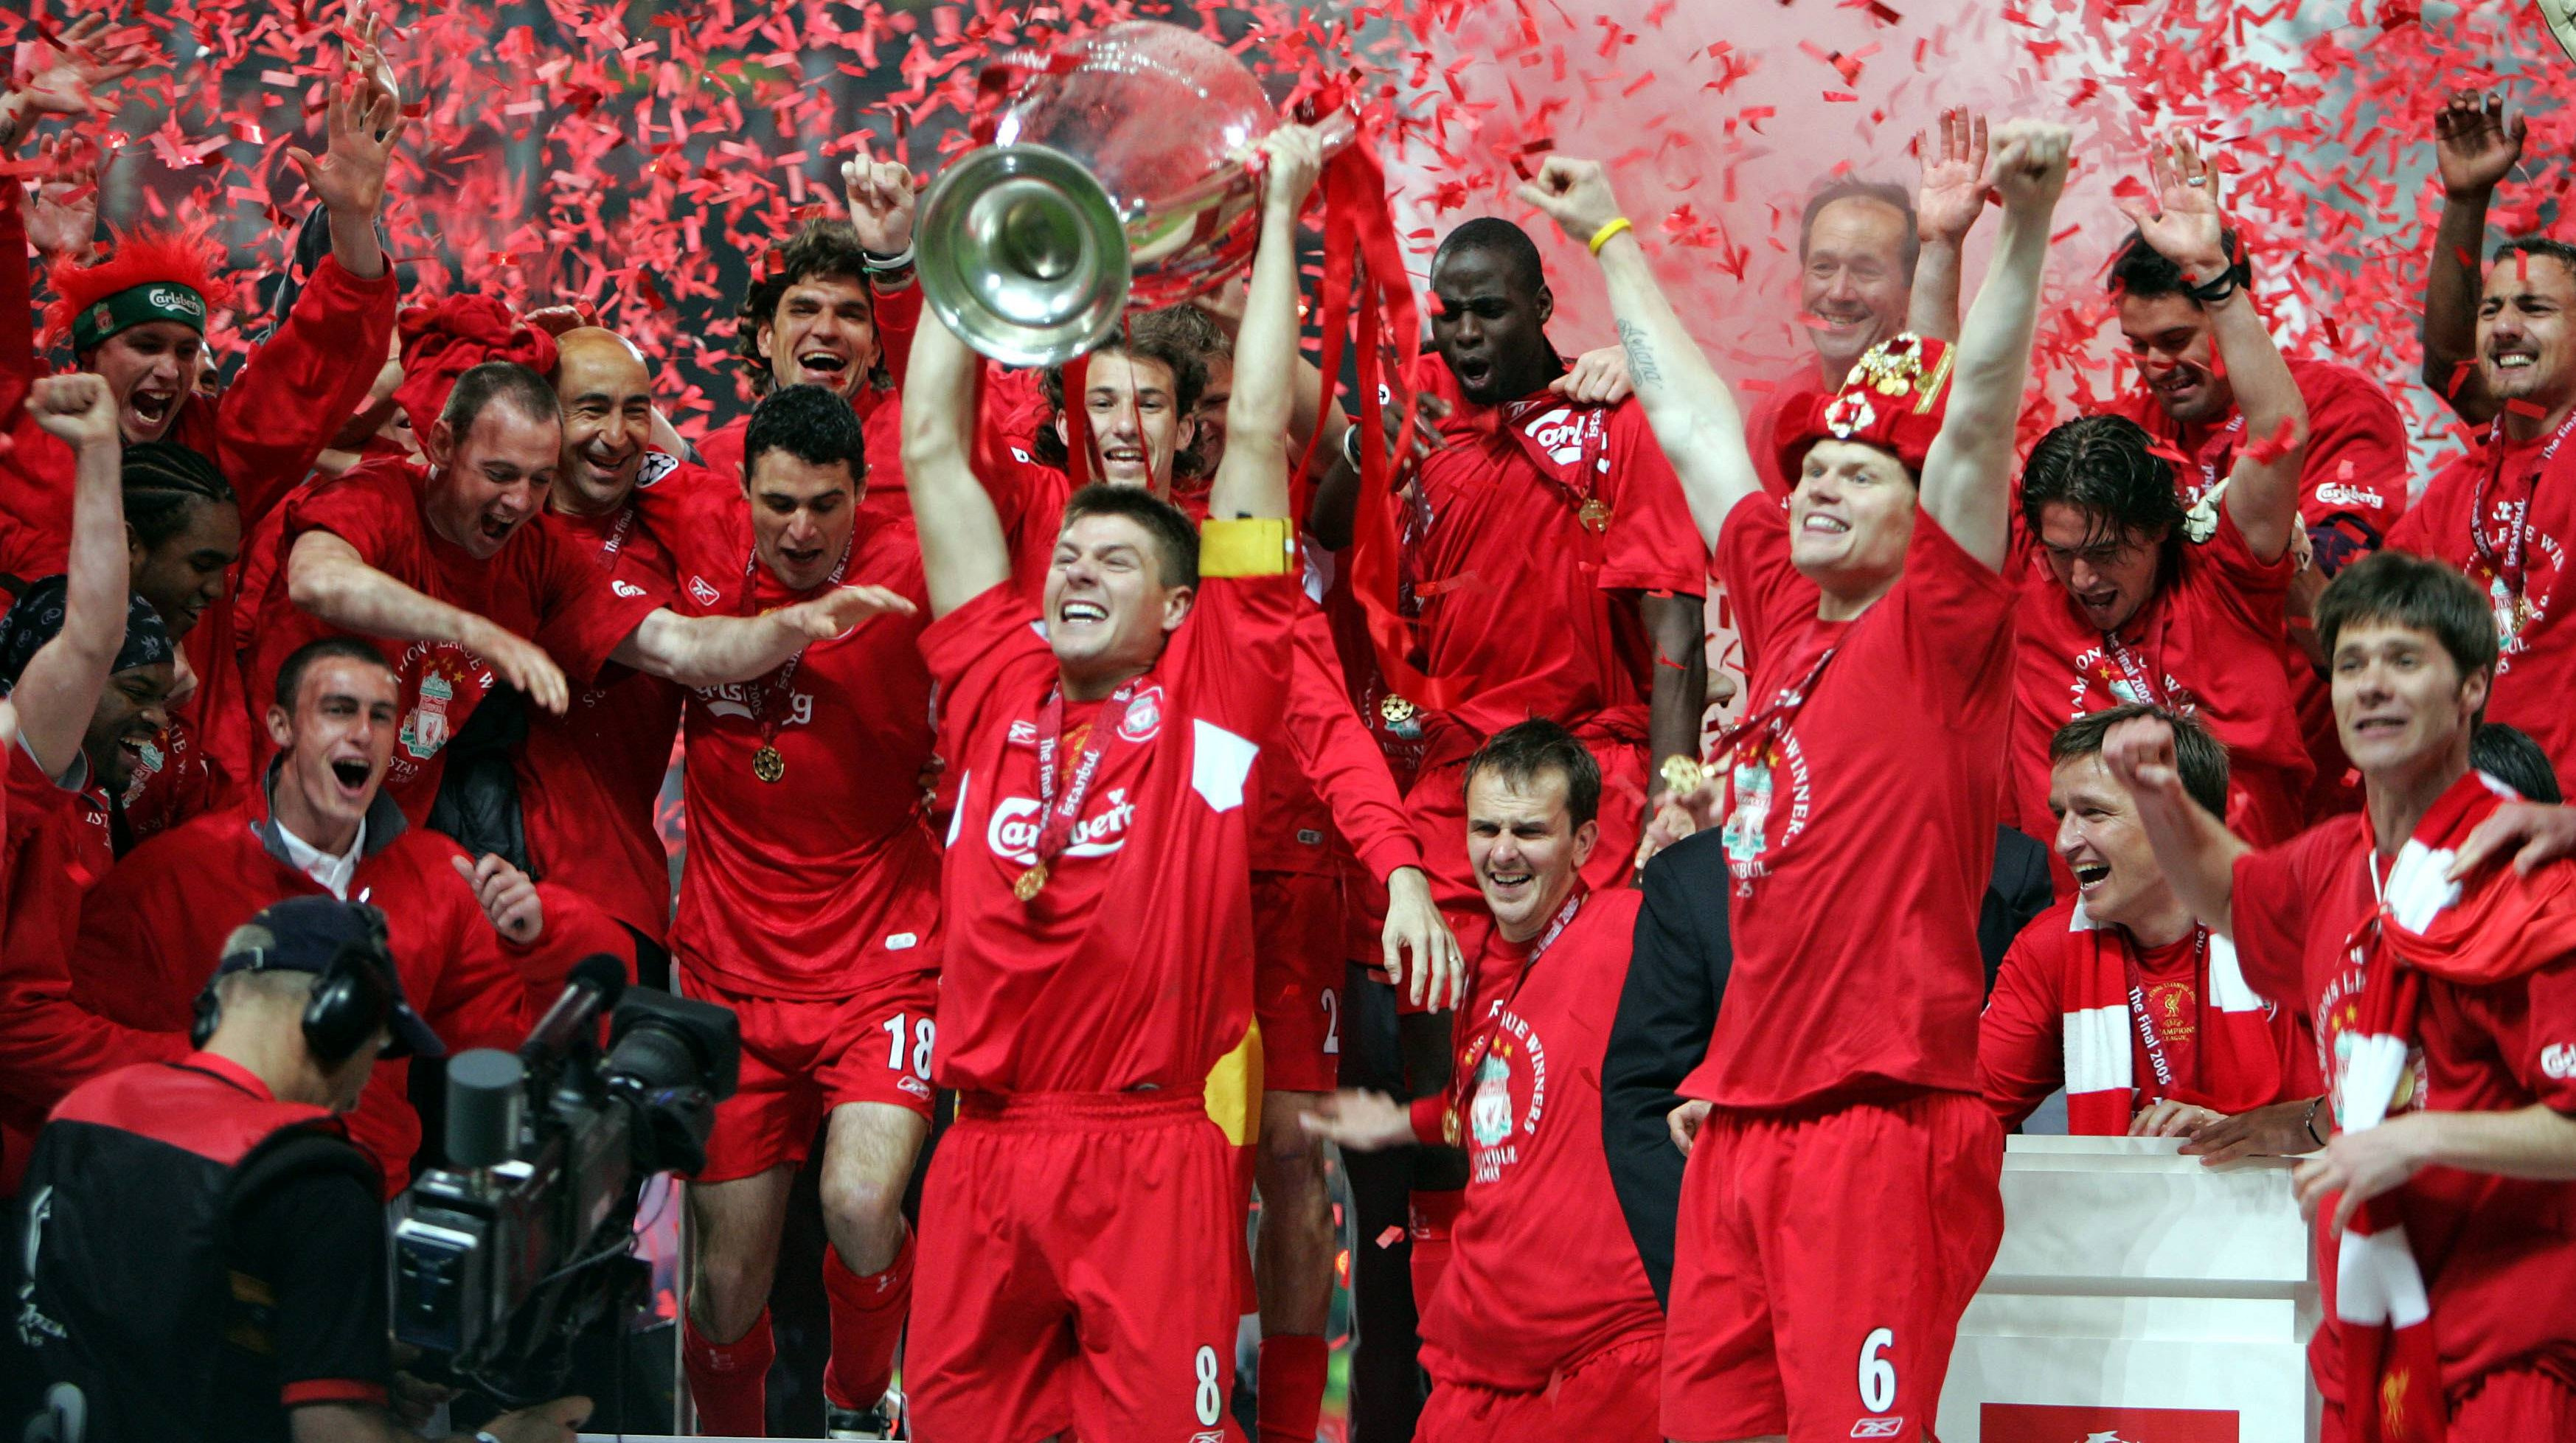 Liverpool vs. Milan and 6 minutes of insanity - The 2005 Champions League  final | Transfermarkt